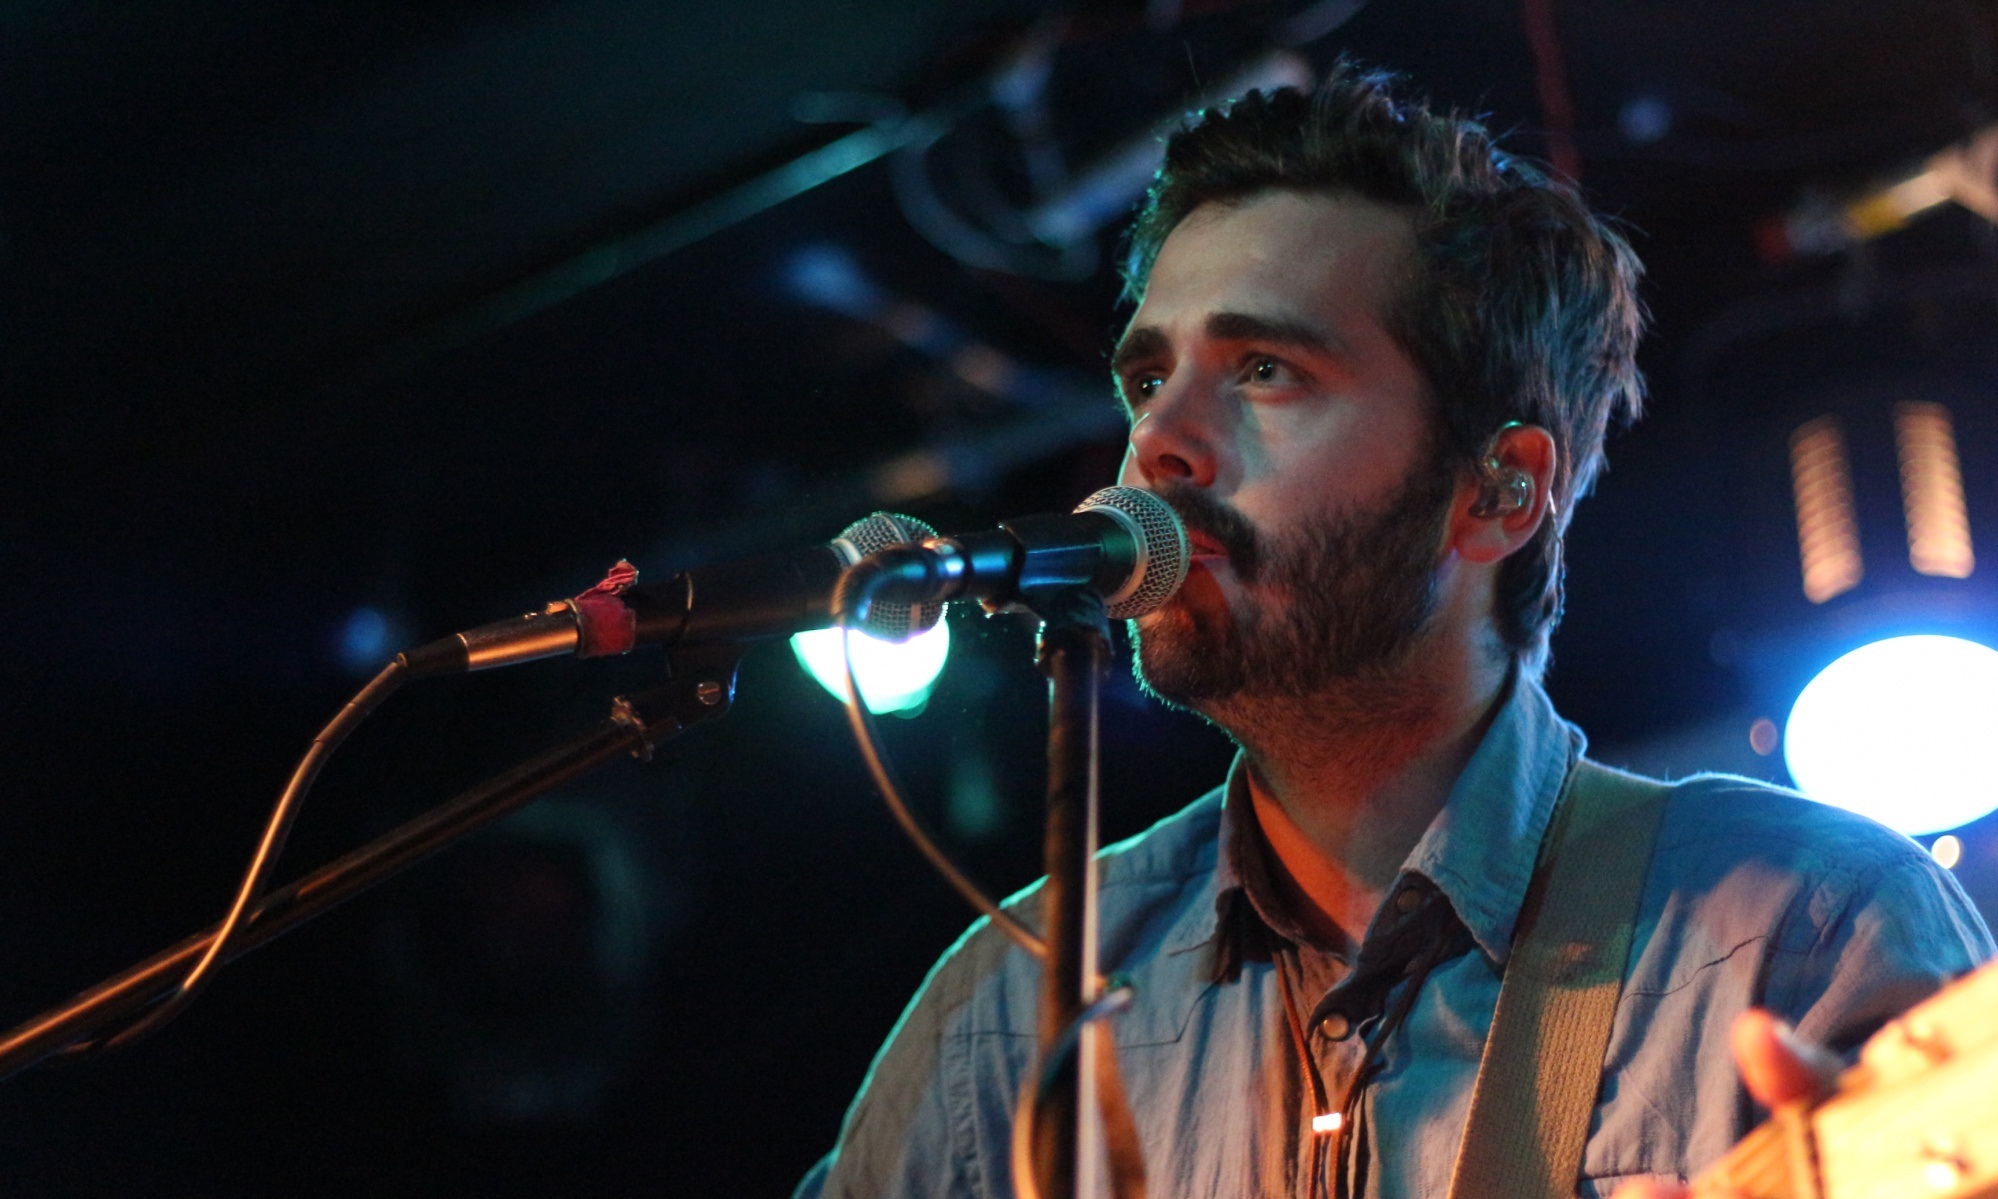 Amazing Lord Huron Pictures & Backgrounds